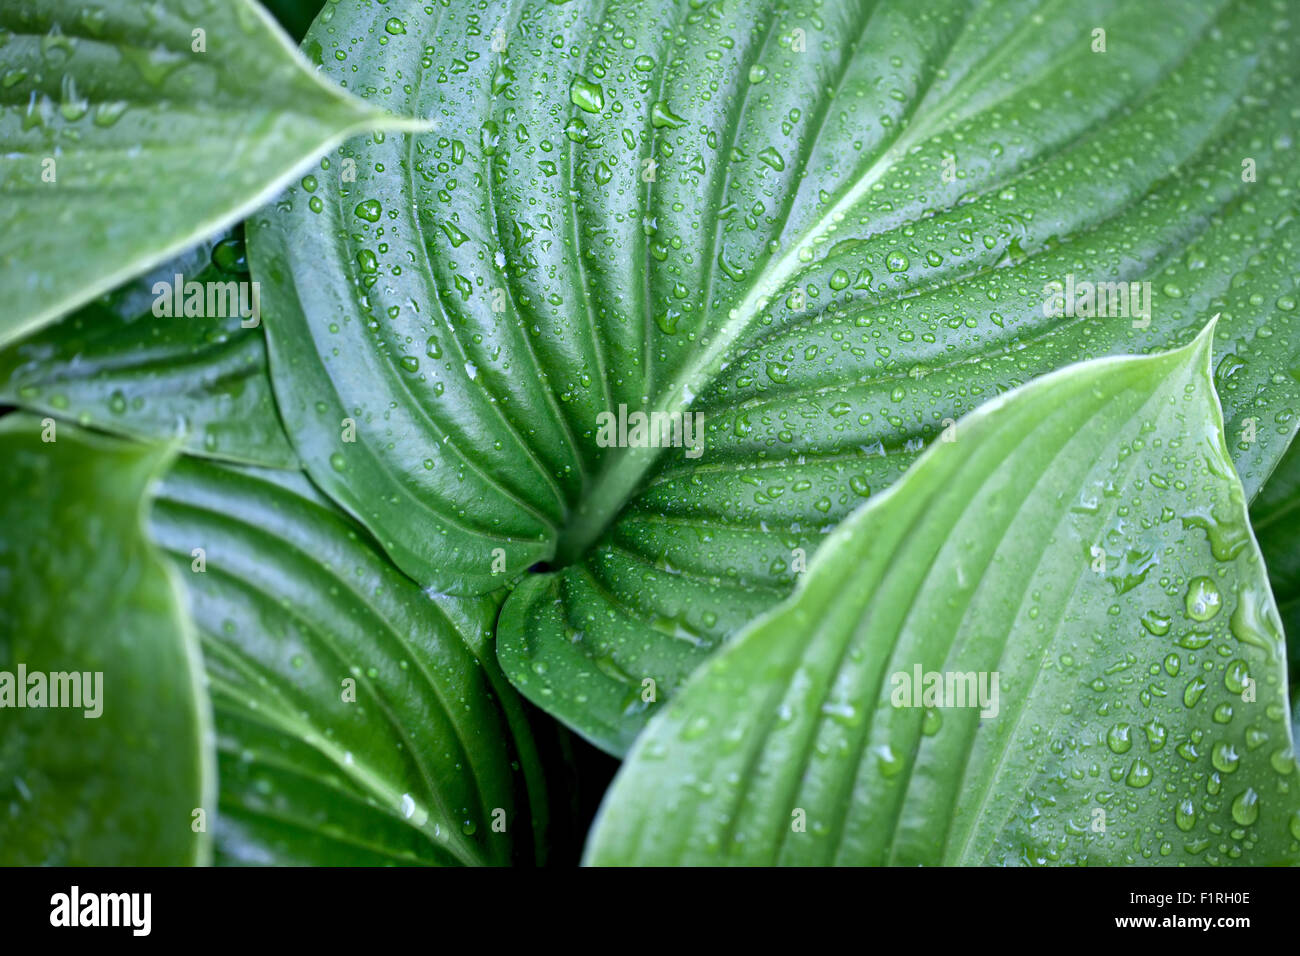 Large green leaves Stock Photo